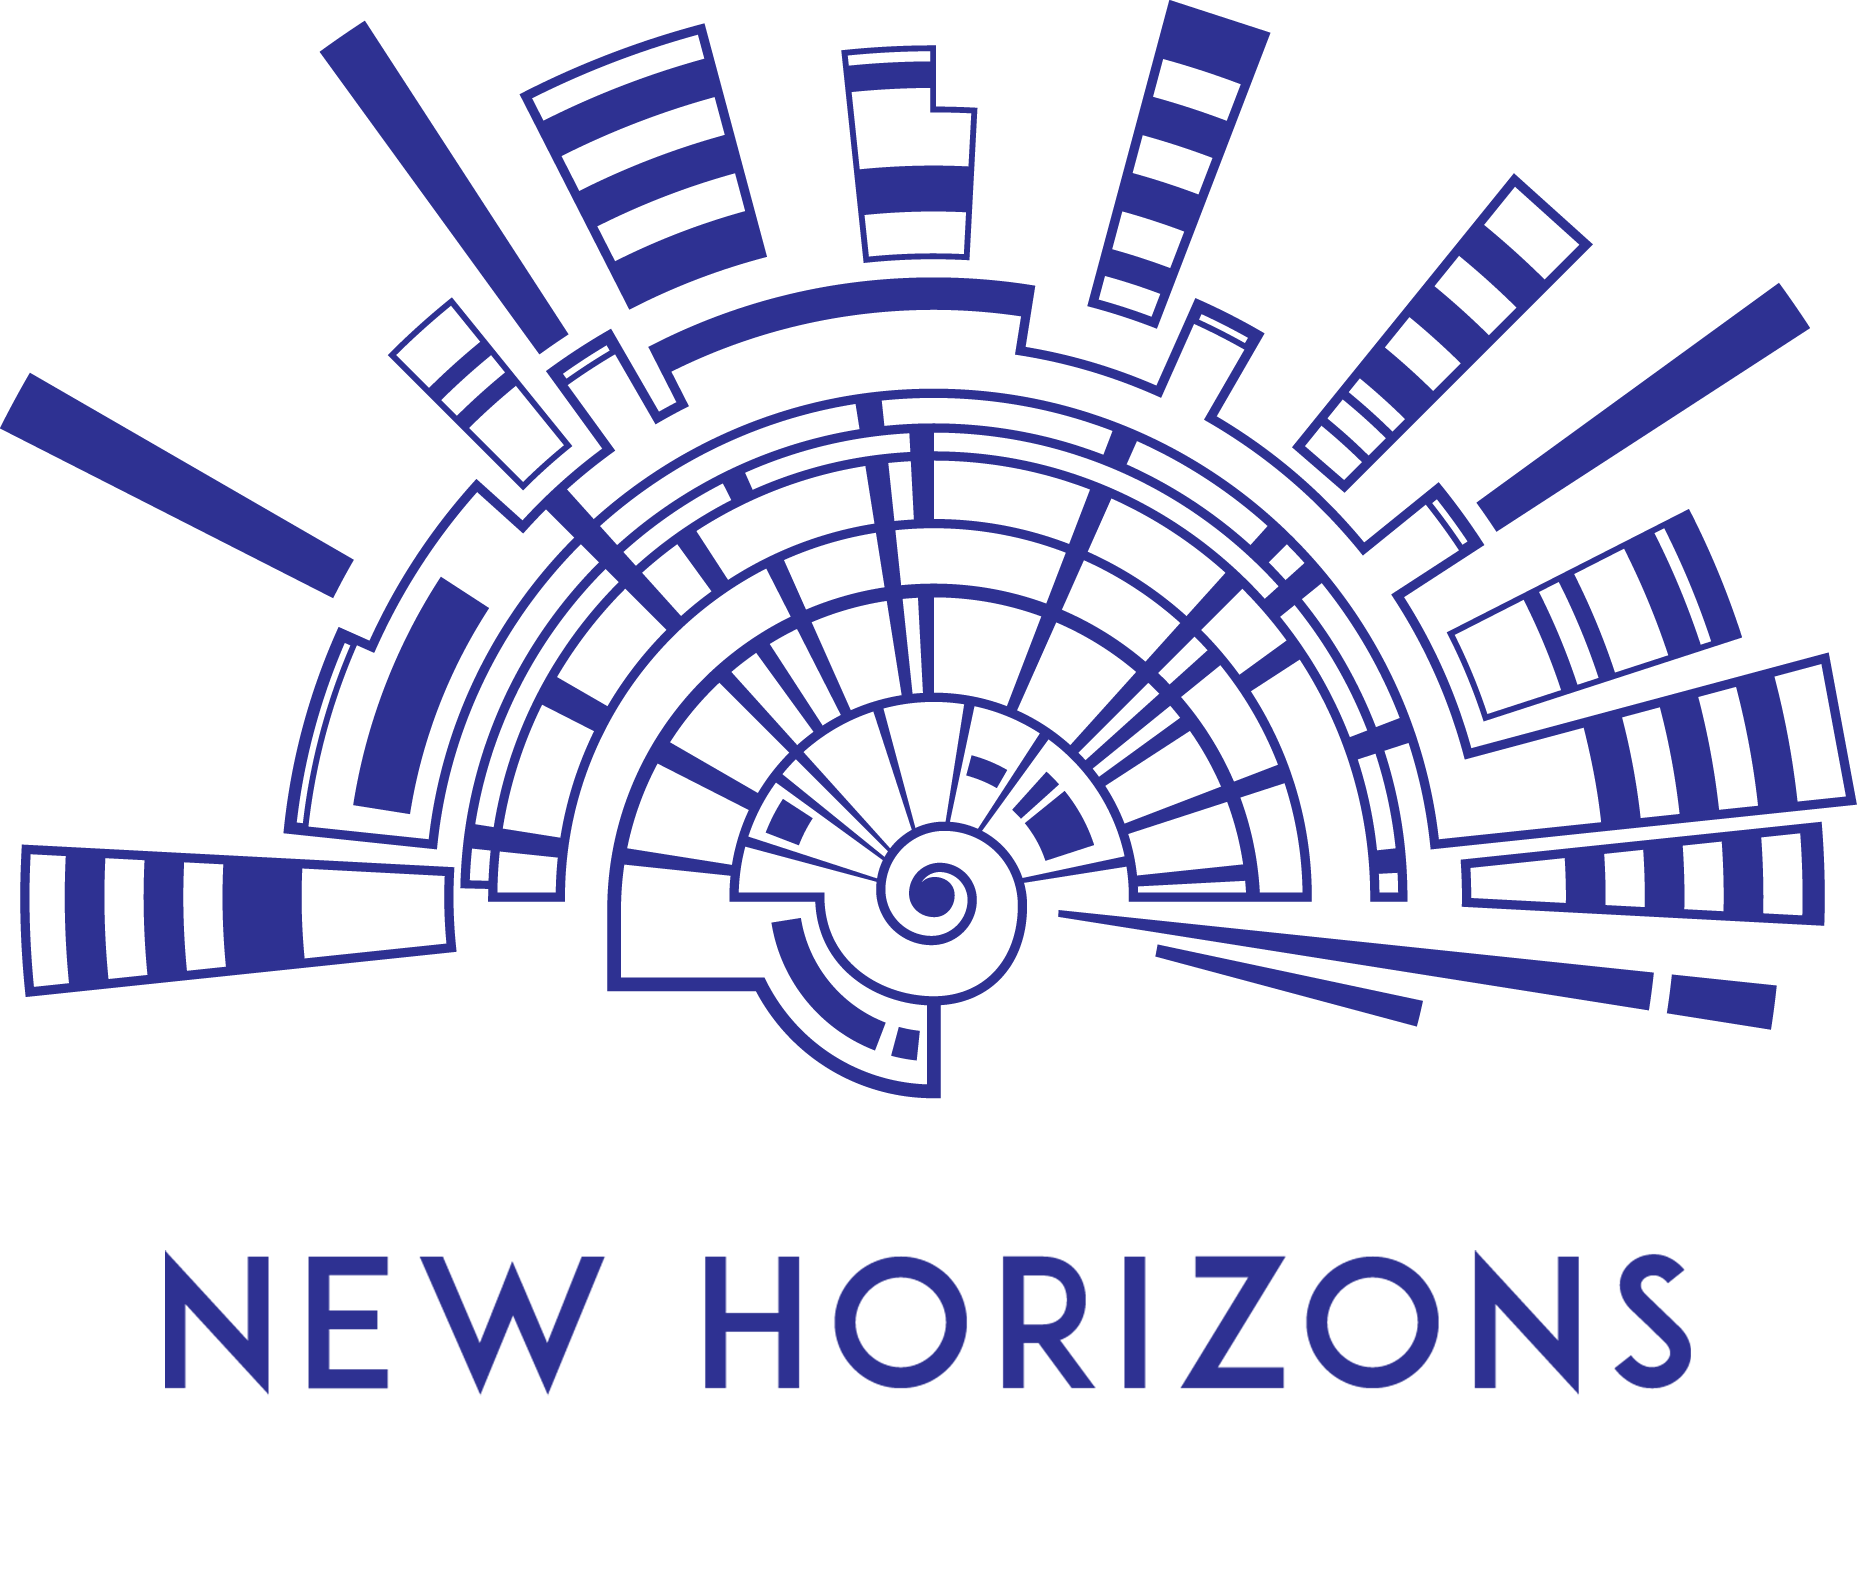 New Horizons Conference